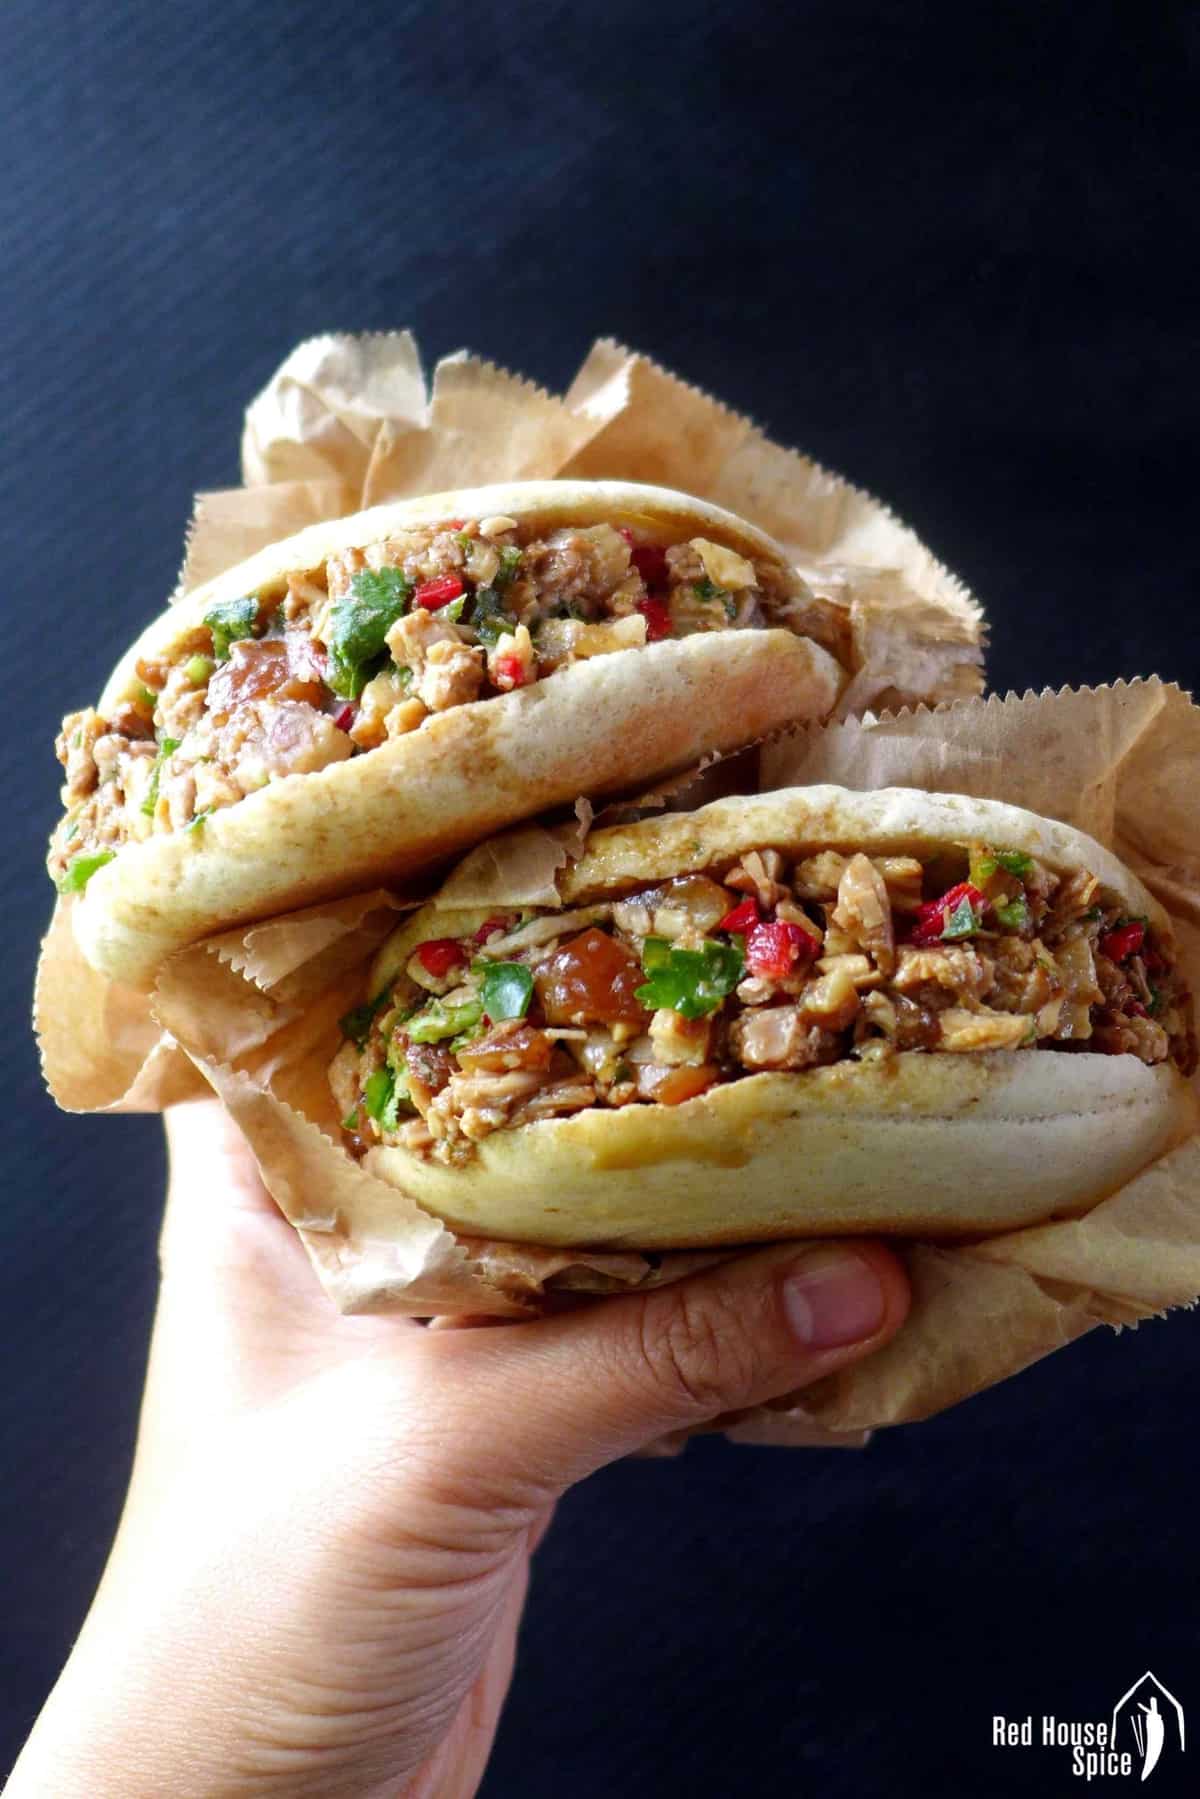 Two chinese pork burgers held by a hand